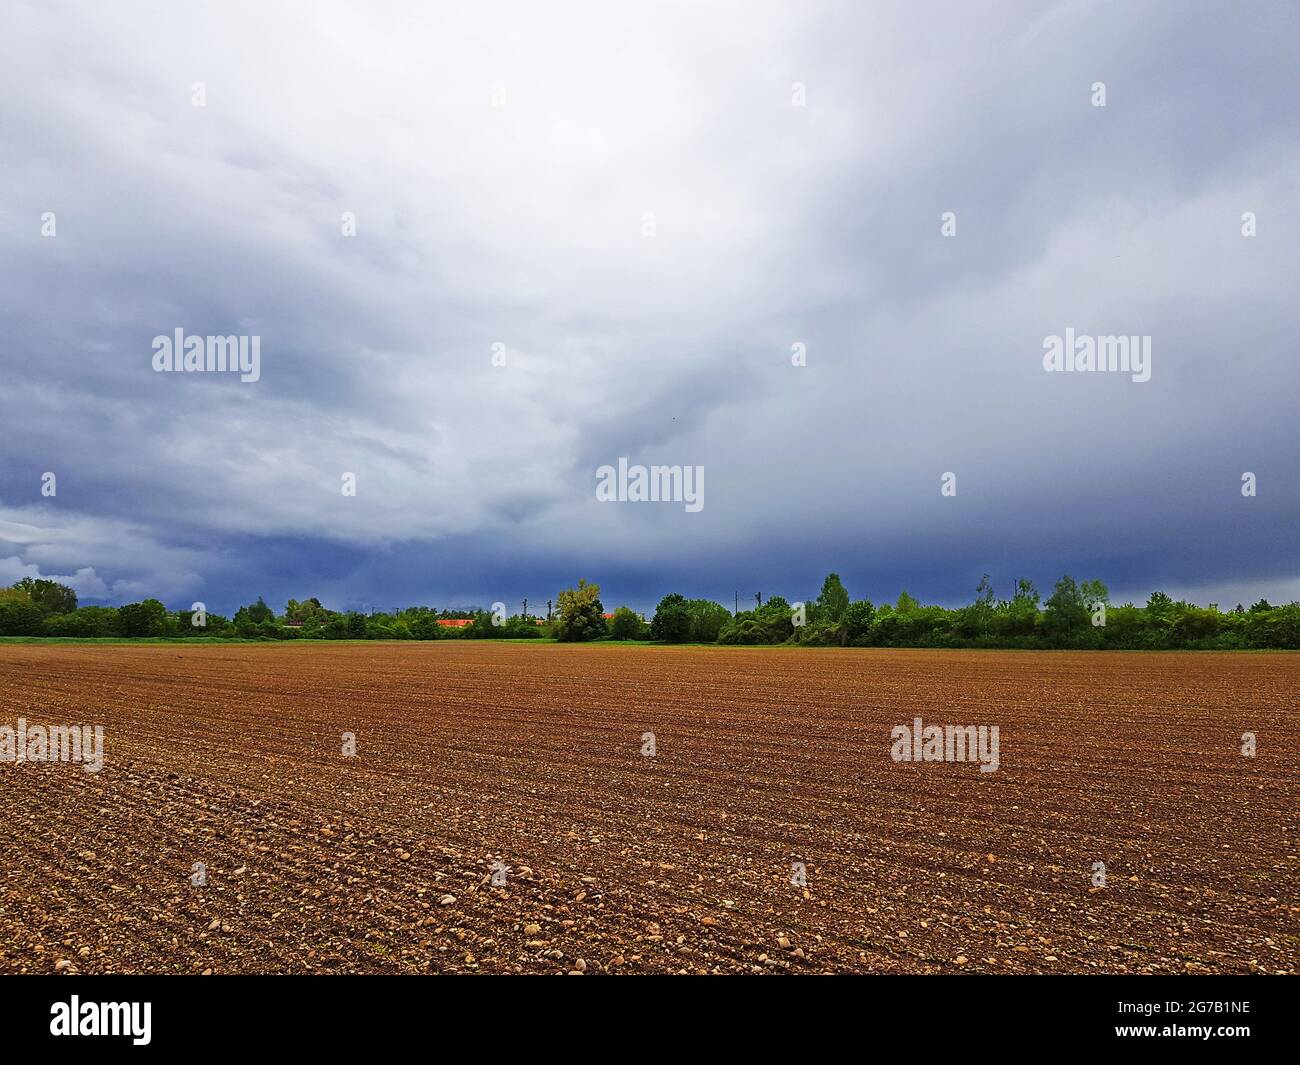 Sky with dark clouds over arable landscape Stock Photo